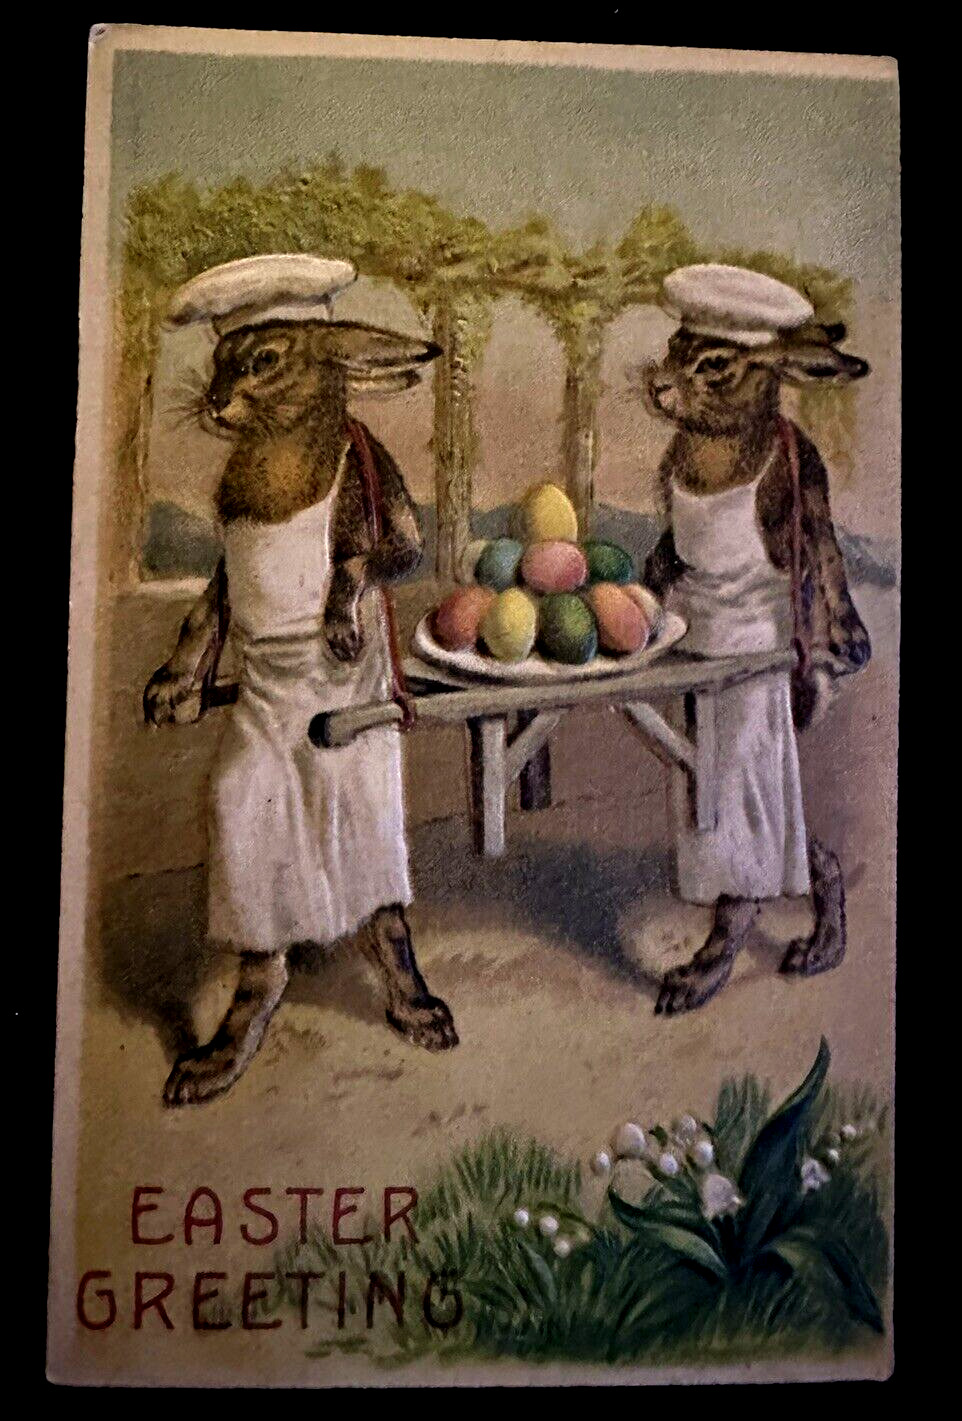 Bunny RABBITS~Chefs in Aprons~Carry Colorful EGGS~ Easter Fantasy Postcard-h269